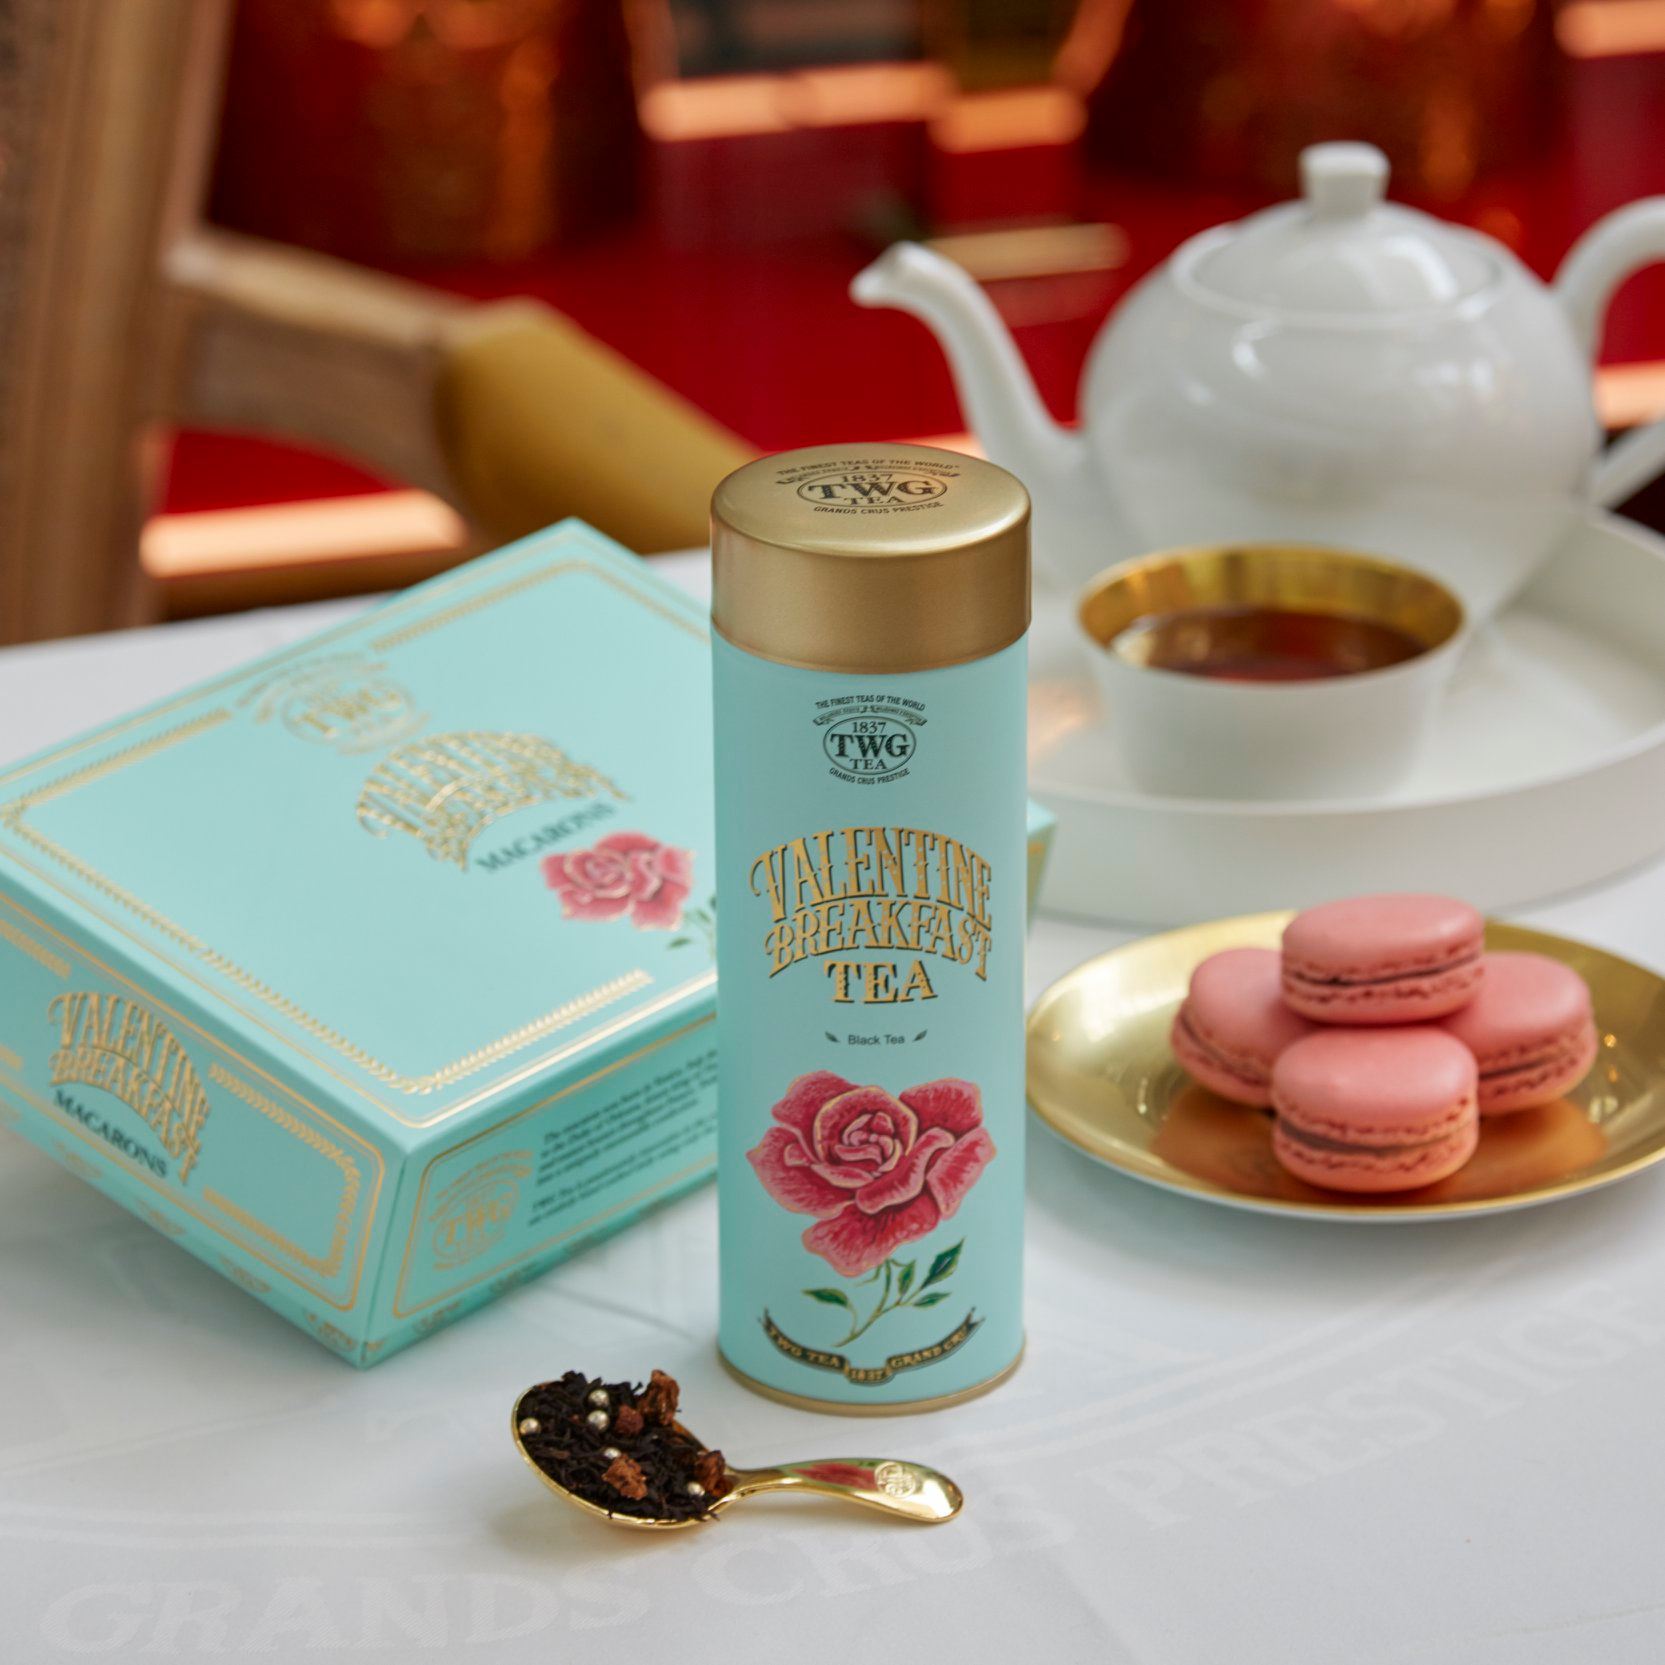 Created in the spirit of high fashion and the creative designers of haute couture, the Valentine Breakfast Tea is the romance that you never realised you needed